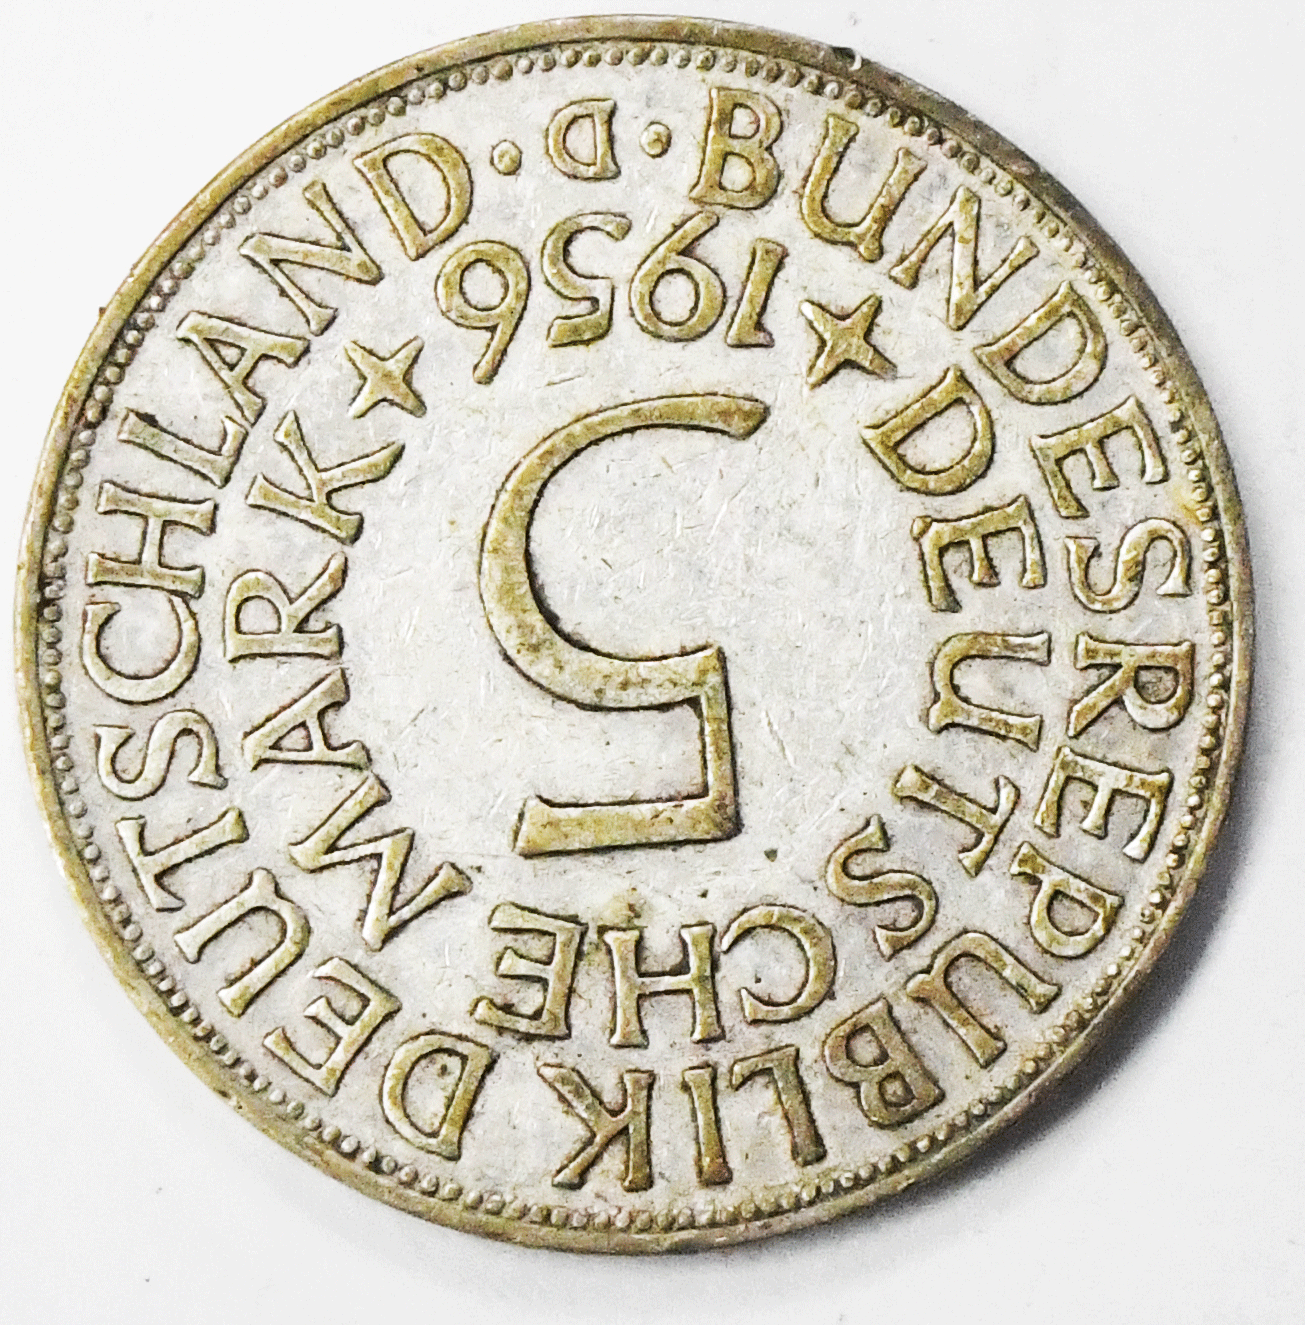 1956 D Germany Federal Republic 5 Five Mark Silver Coin KM# 112.1